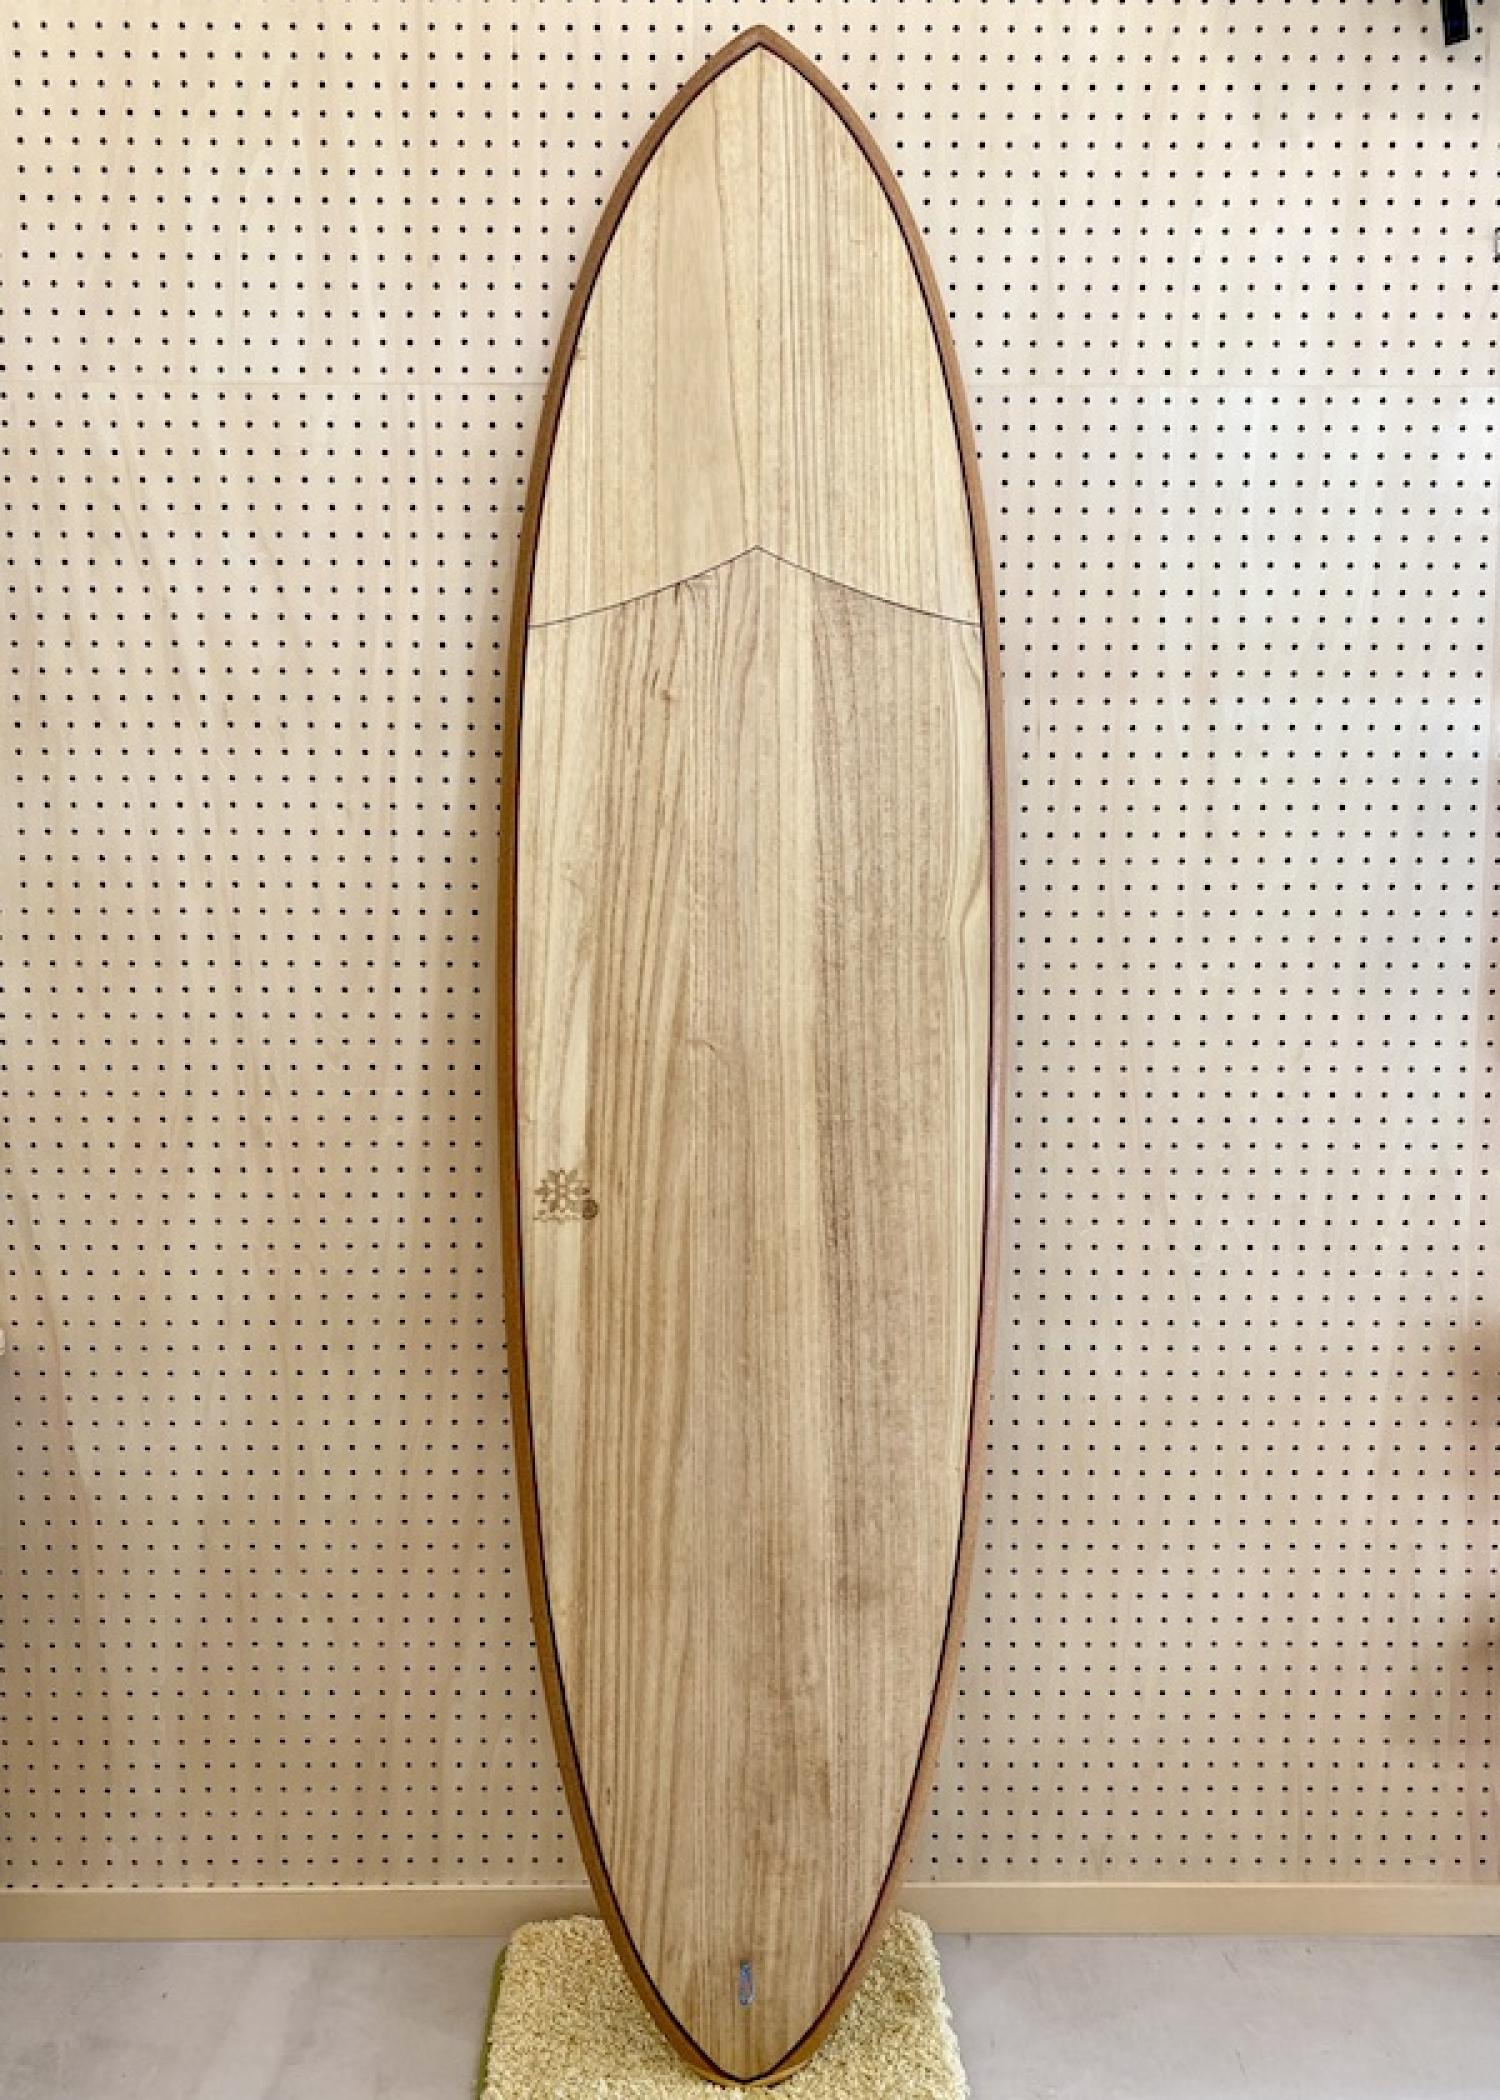 USED (Rice Ball 7.2 LASCA WOODWORKS )